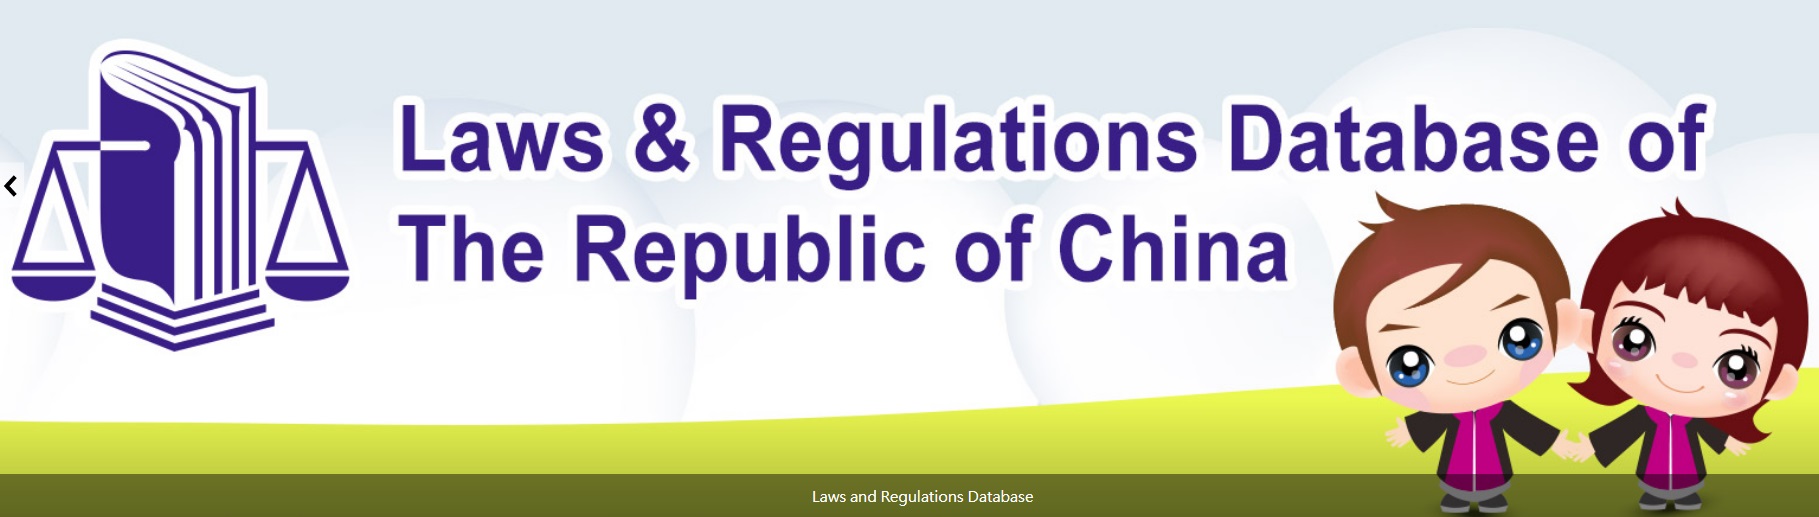 laws-and-regulations-database